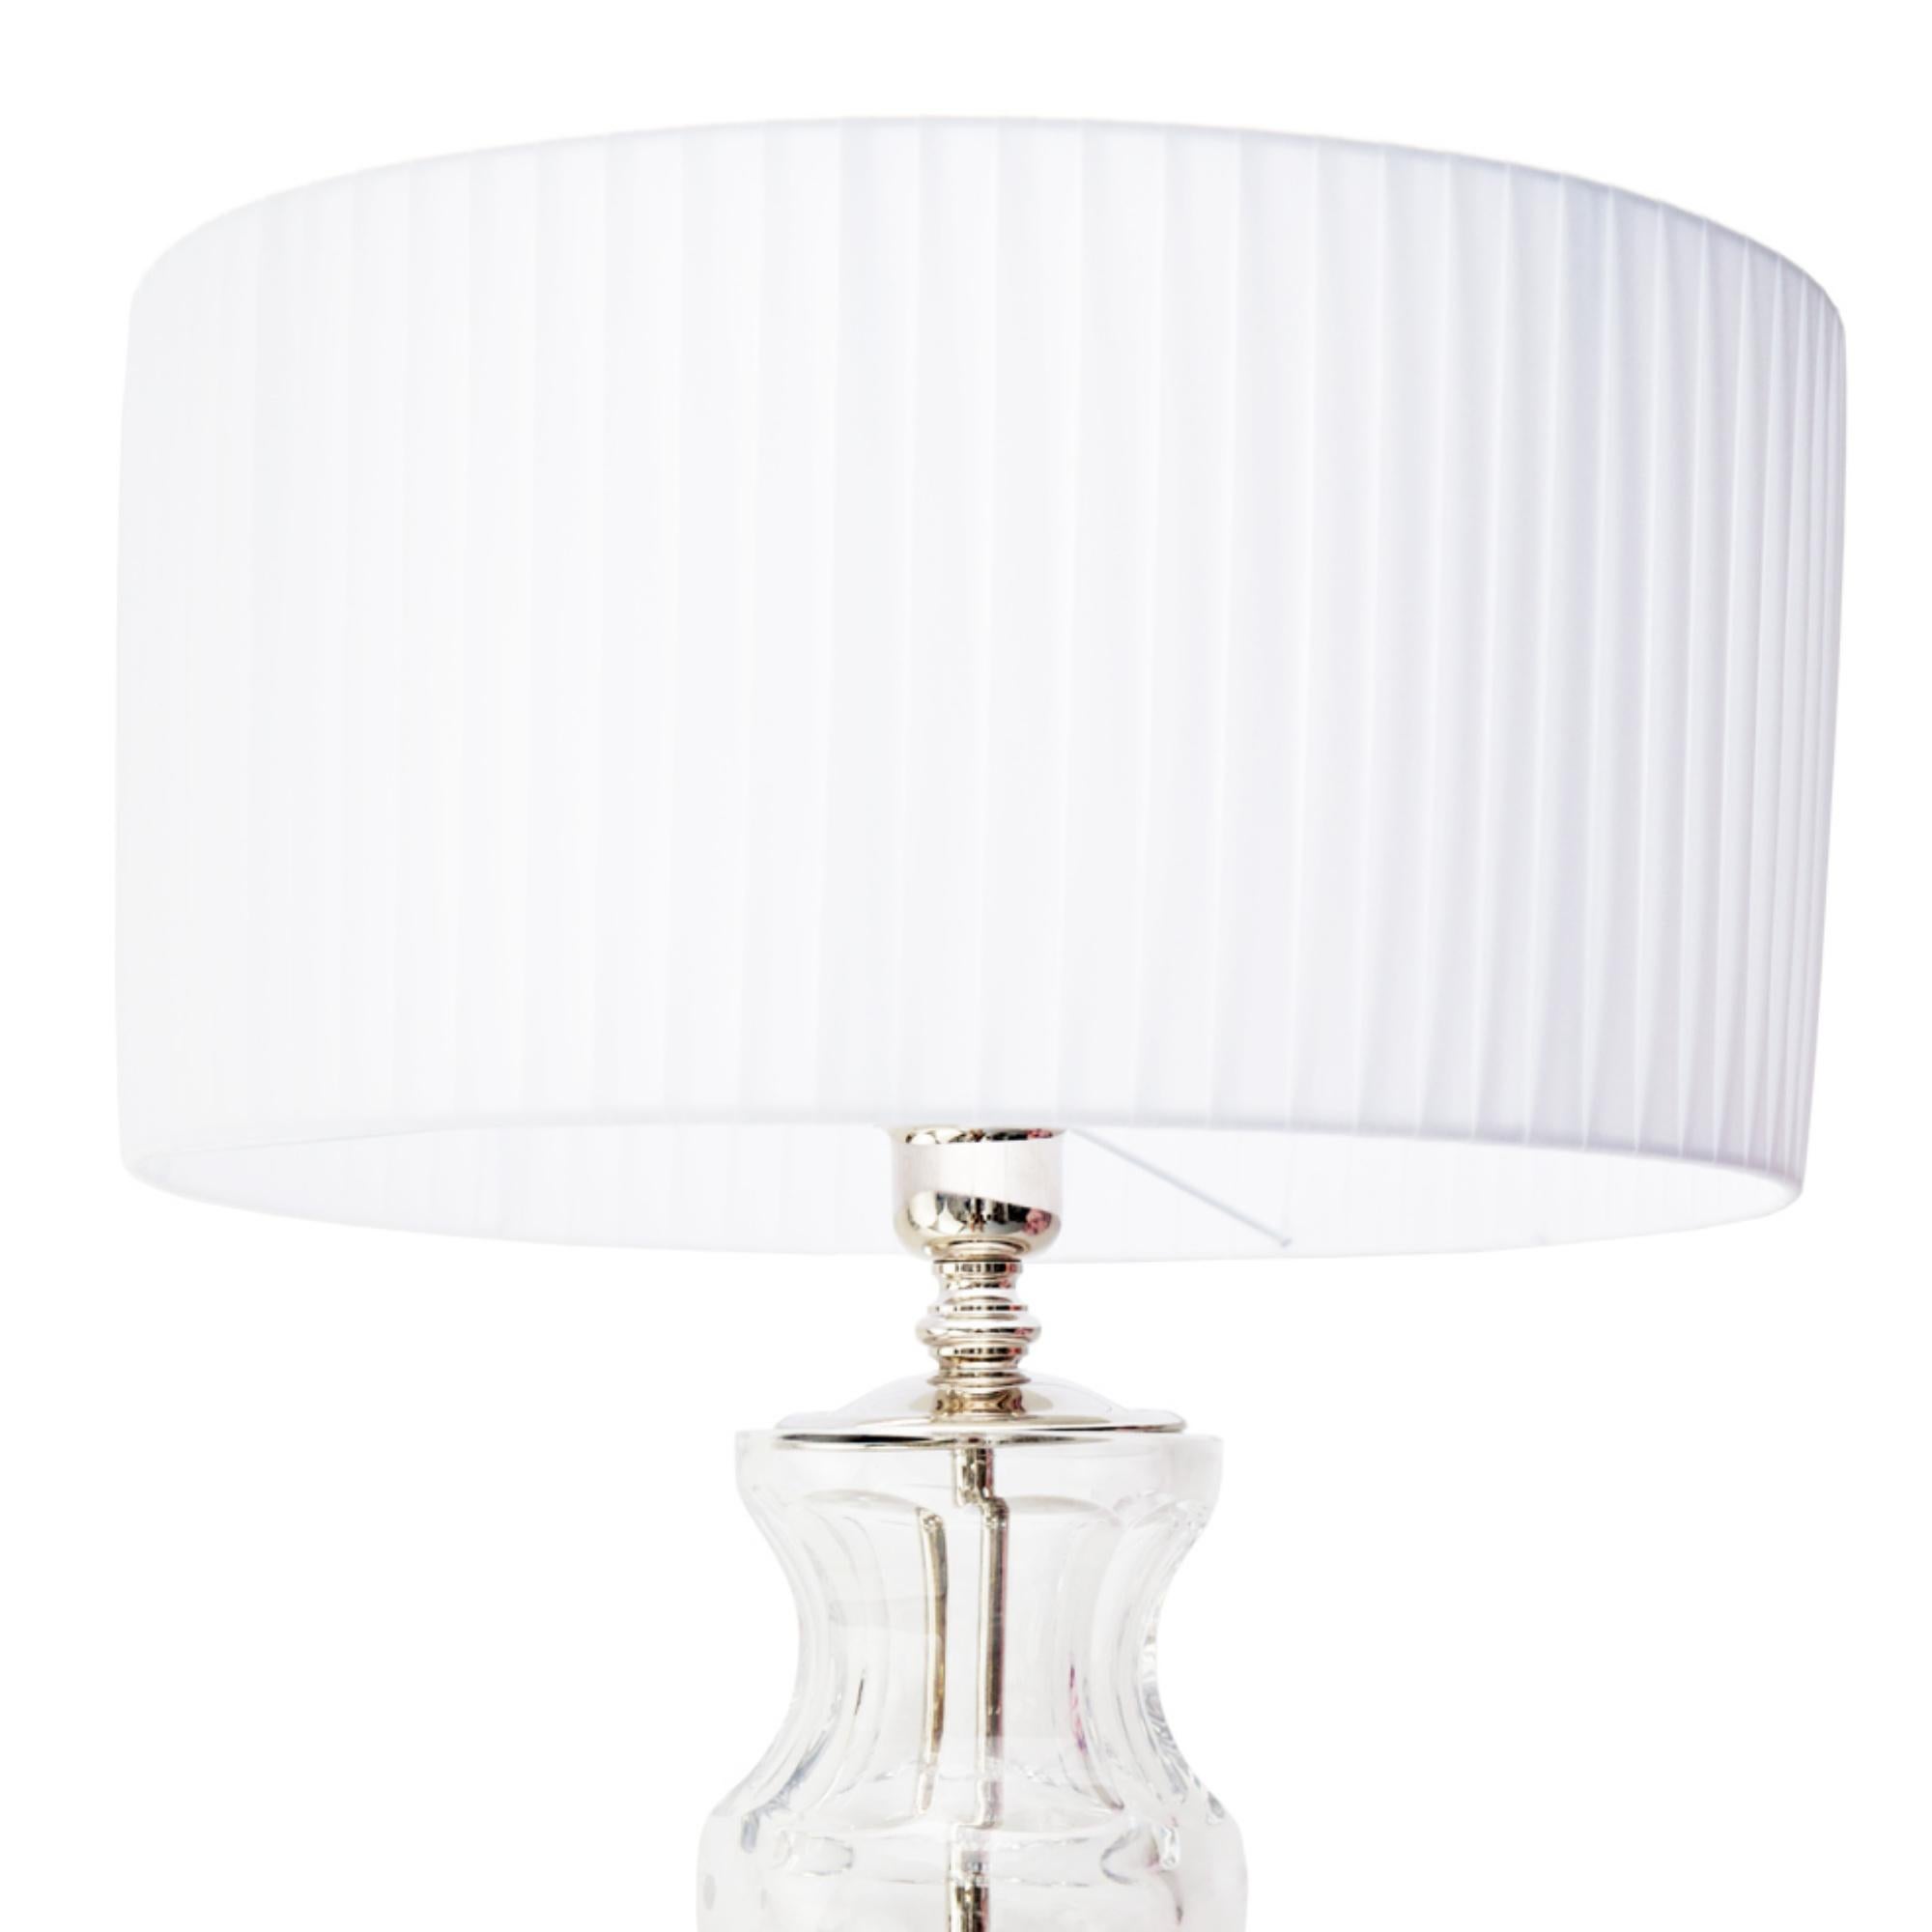 Other Ugo Poggi Firenze Handcrafted Crystal Table Lamp Olmo For Sale